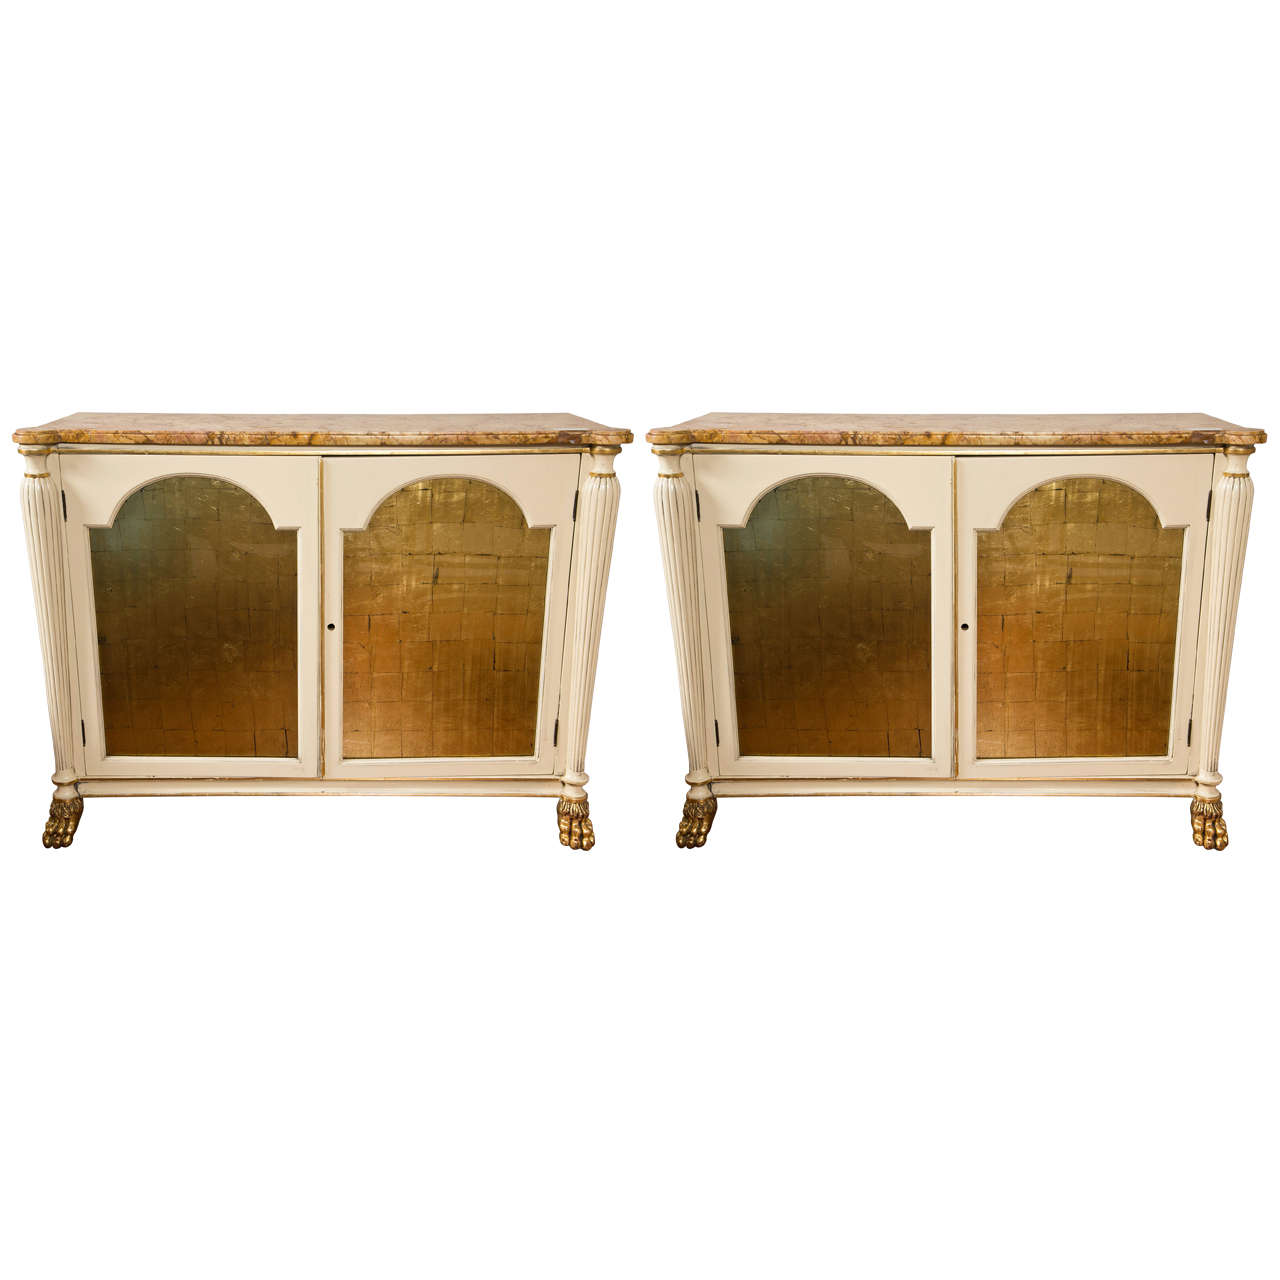 Pair of Regency Style Marble-Top Cabinets